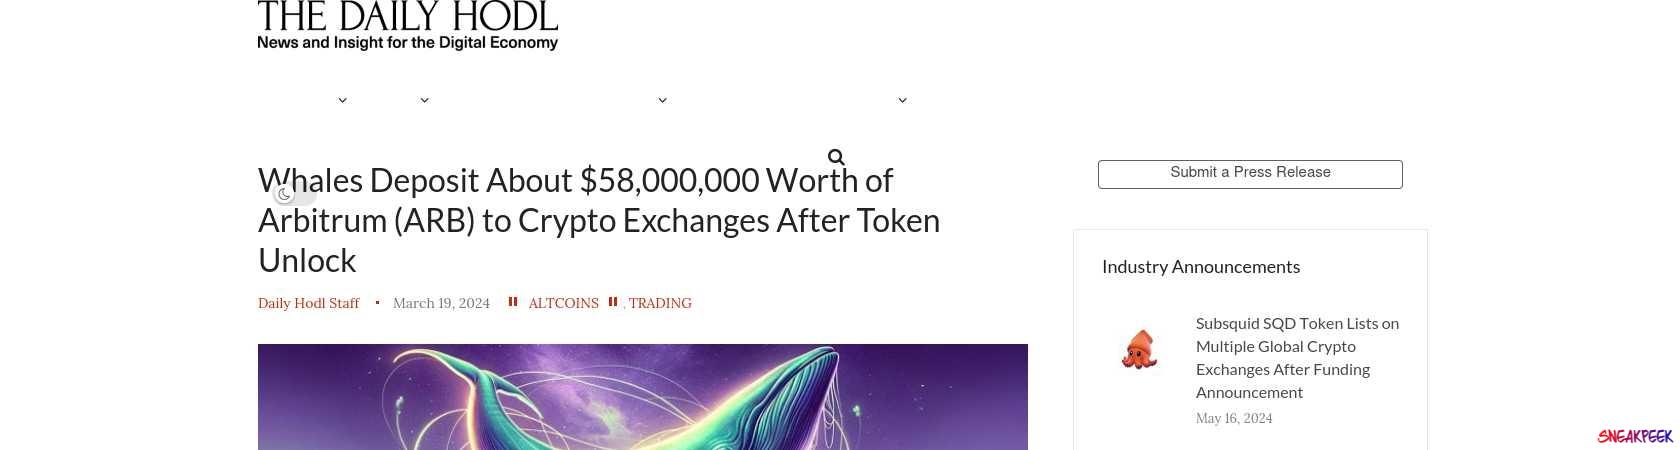 Read the full Article:  ⭲ Whales Deposit About $58,000,000 Worth of Arbitrum (ARB) to Crypto Exchanges After Token Unlock